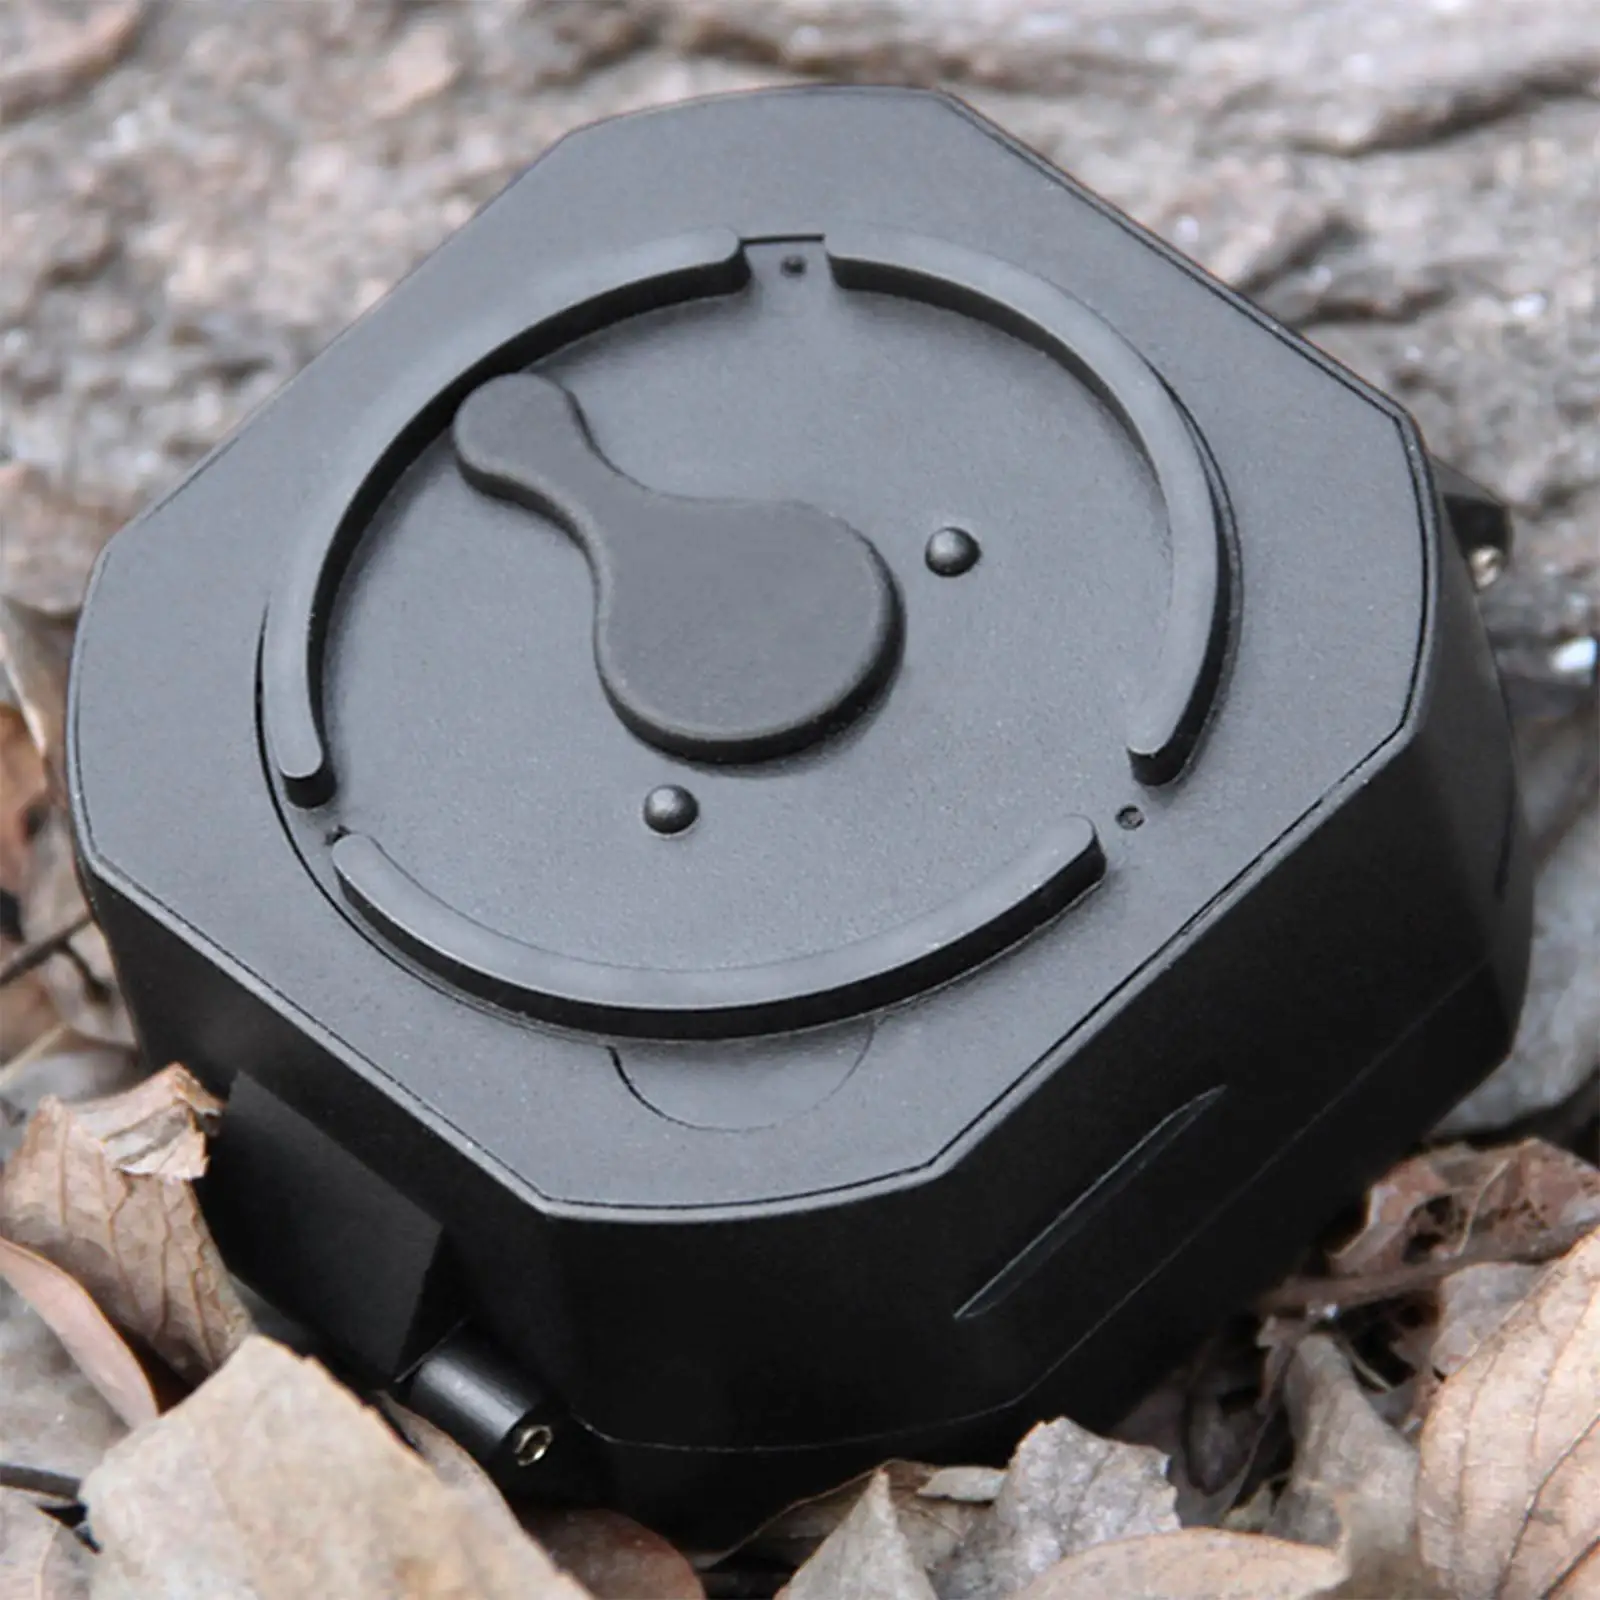 Portable Geology Compass Lensatic Compass for Outdoor Activities